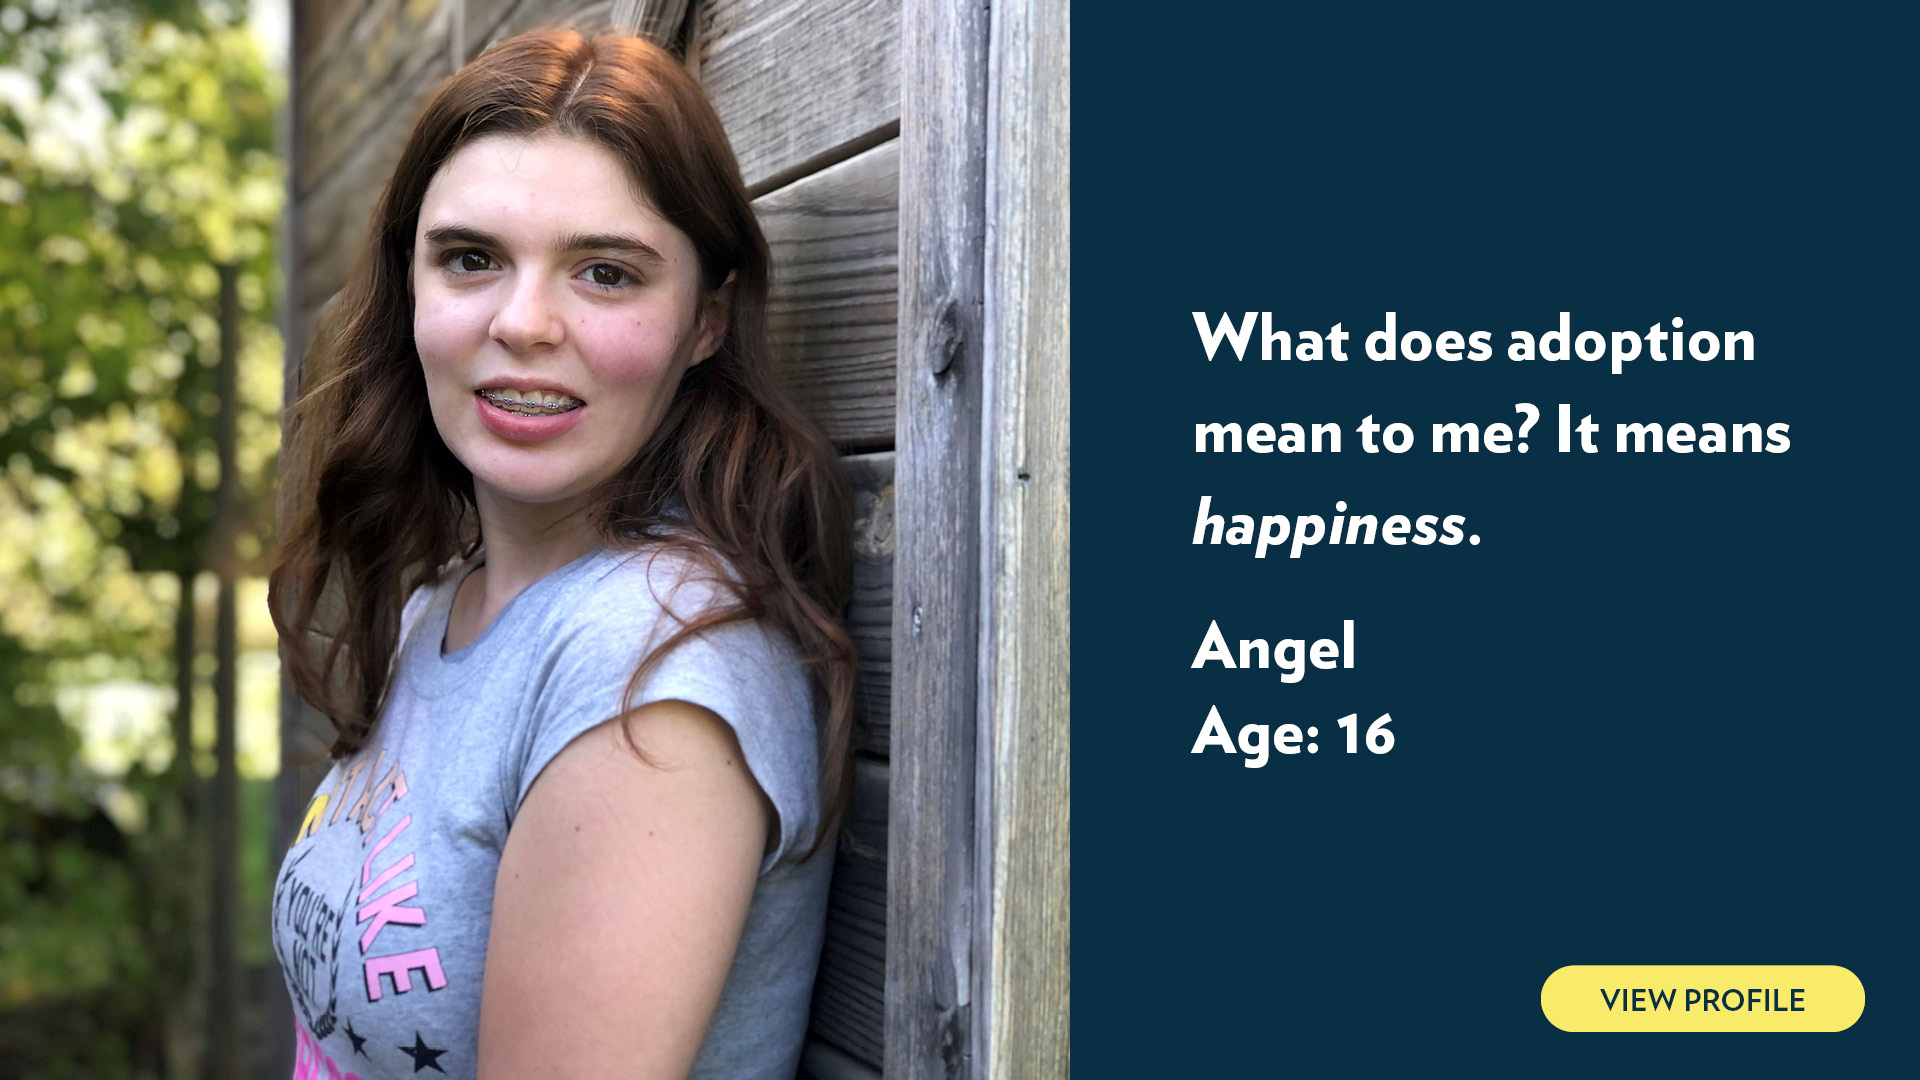 Angel, age 16. What does adoption mean to me? It means happiness. View profile.